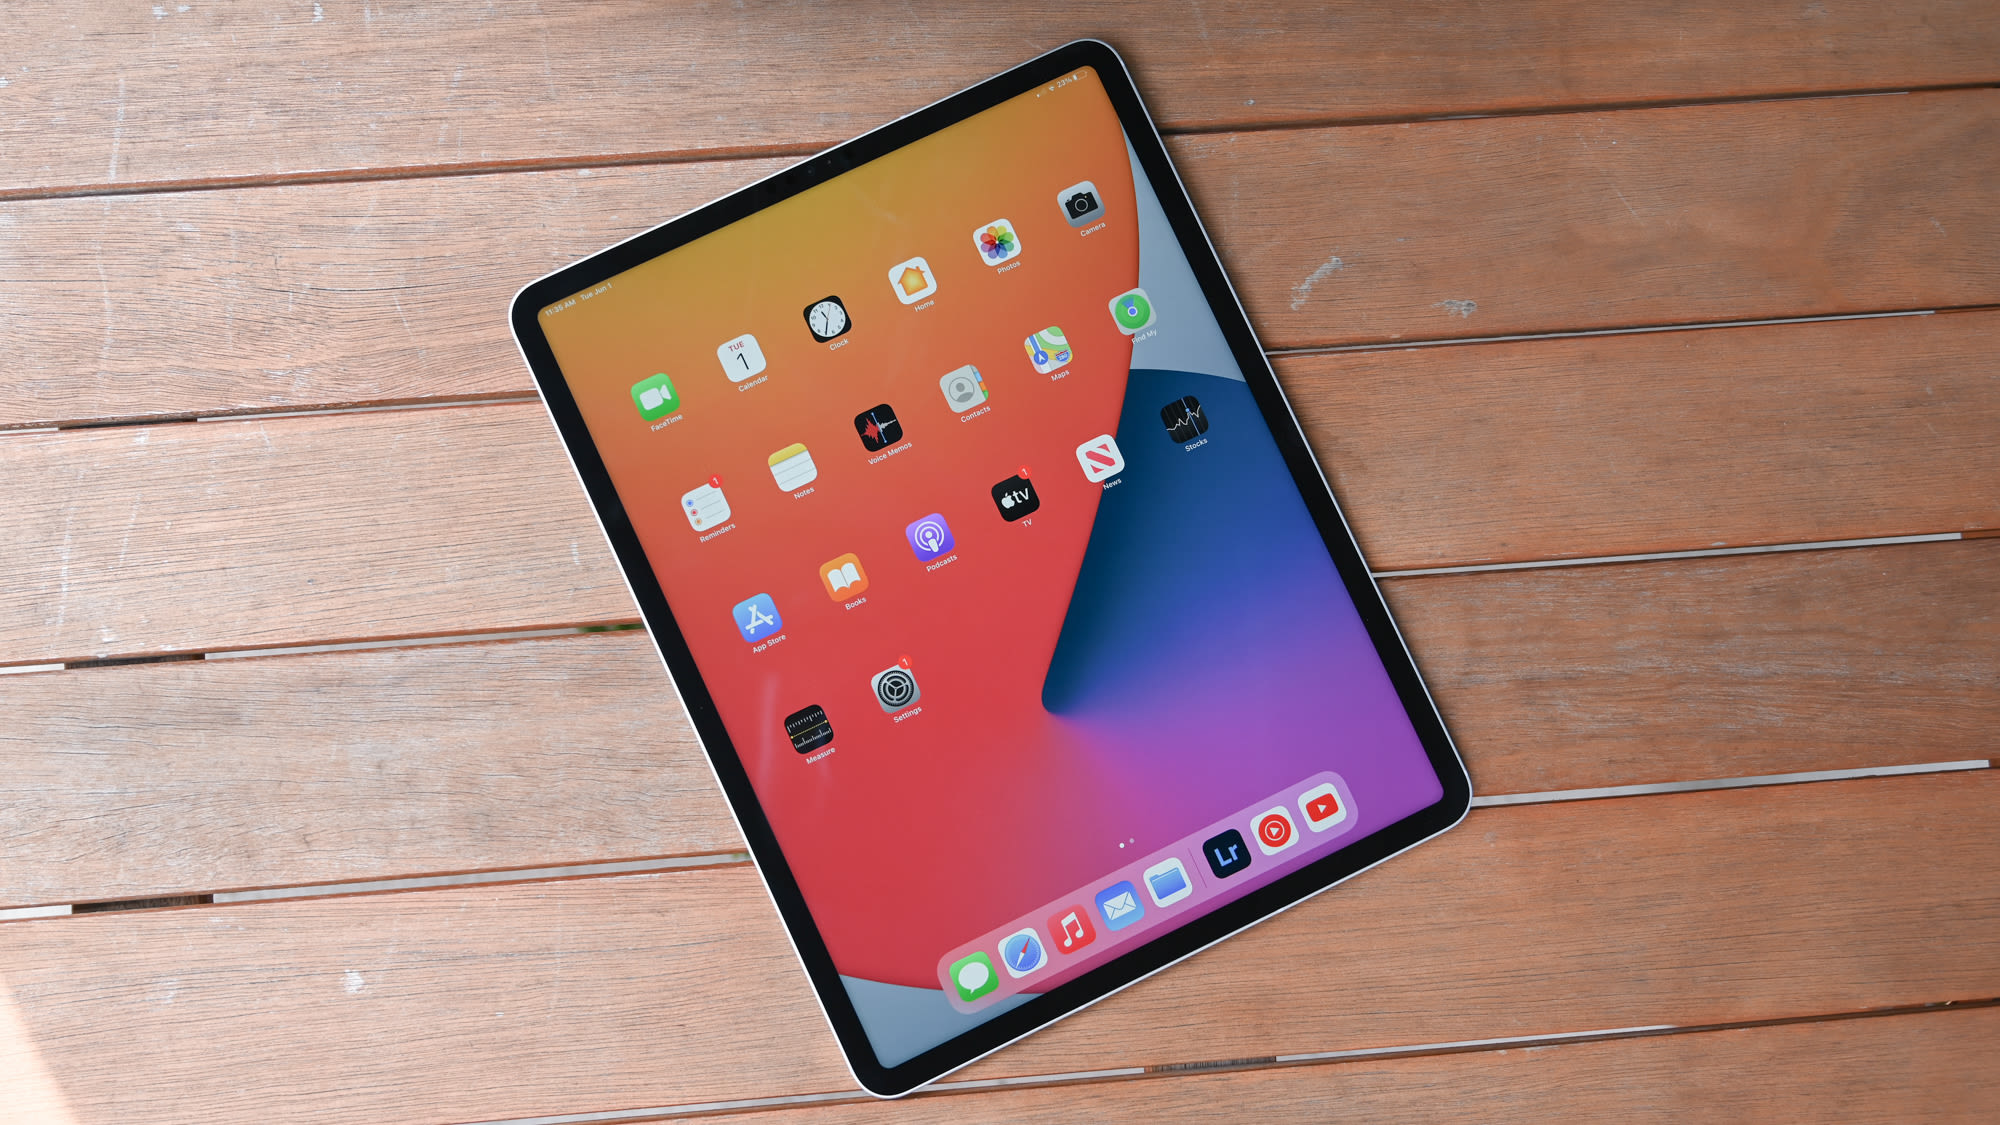 Apple’s new iPads bore me, and I’m tired of pretending otherwise